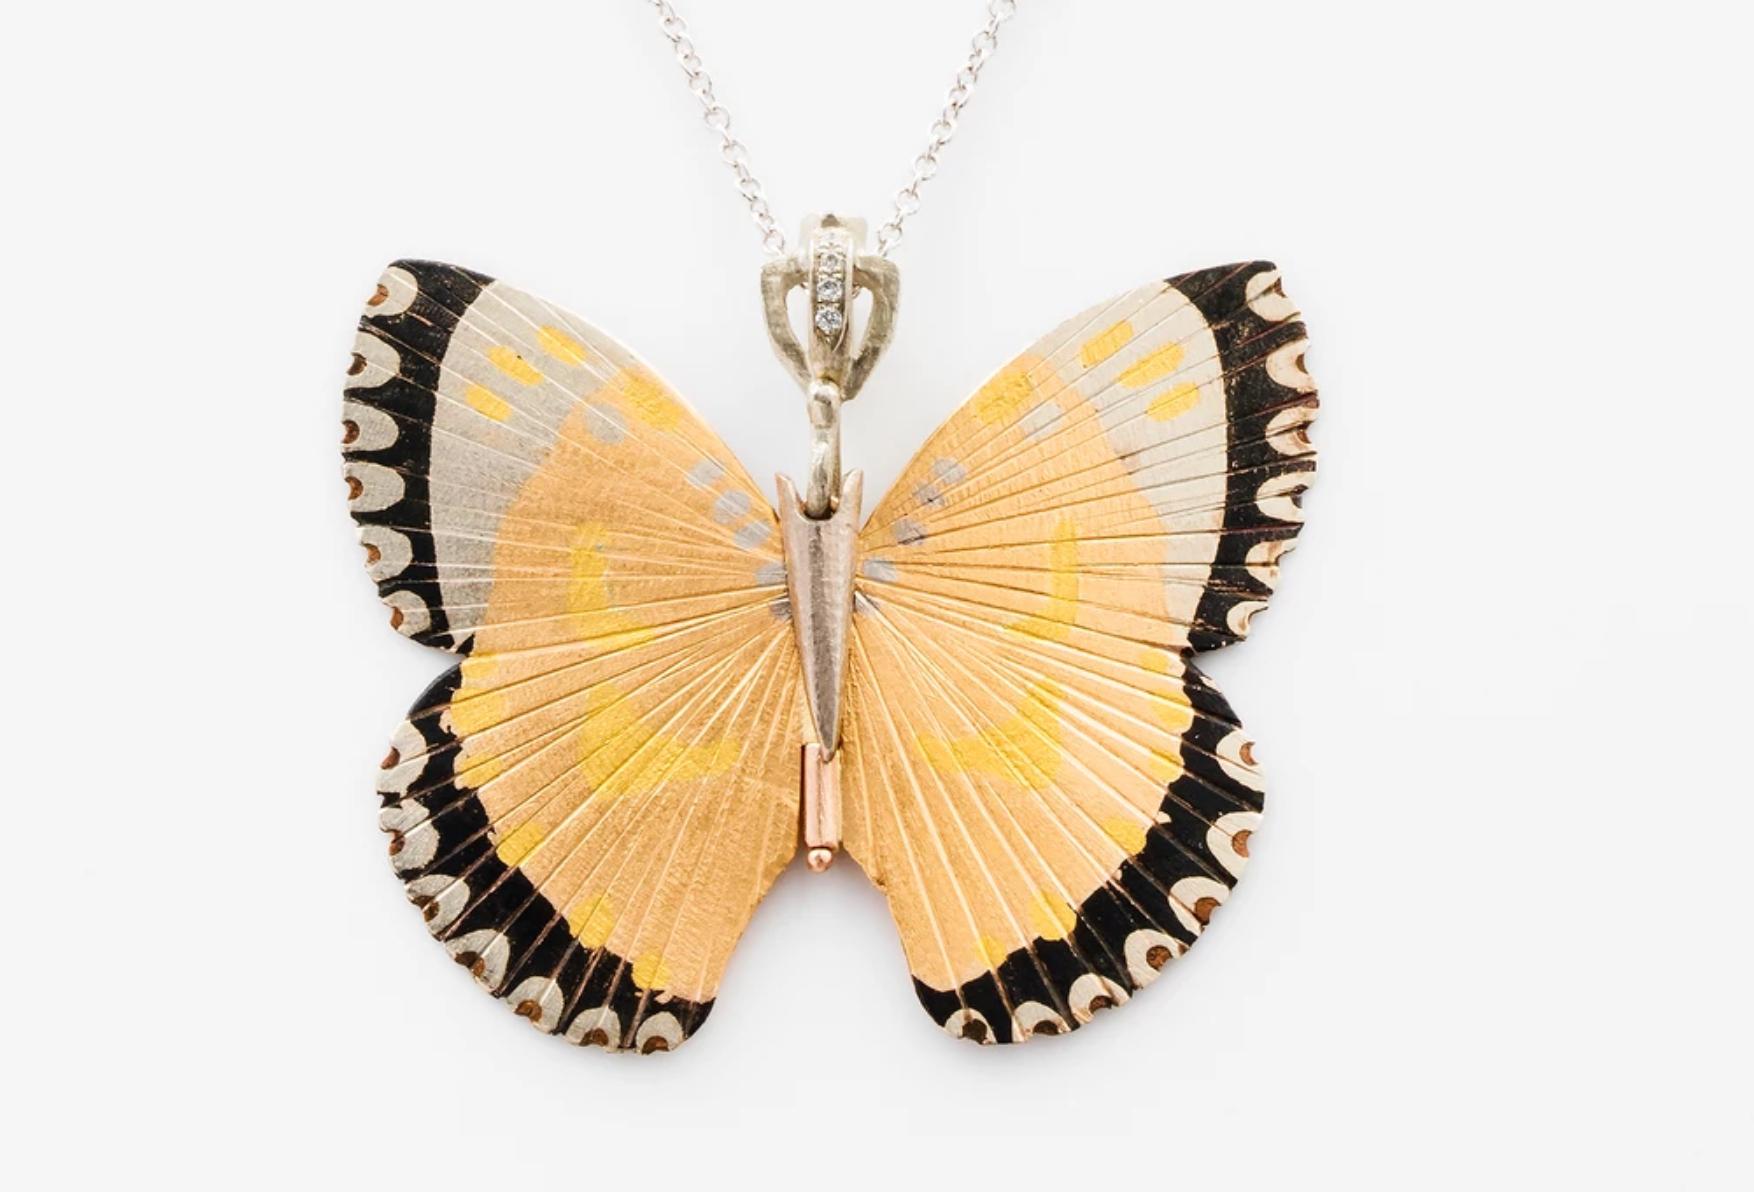 James Banks's signature butterfly necklace features a Large White Lacewing species Butterfly with a hinge at the center to allow movement of the wings, made of Shakudo, Platinum, 18k White Gold, 18k Rose Gold, and 24k Yellow Gold, with white diamond